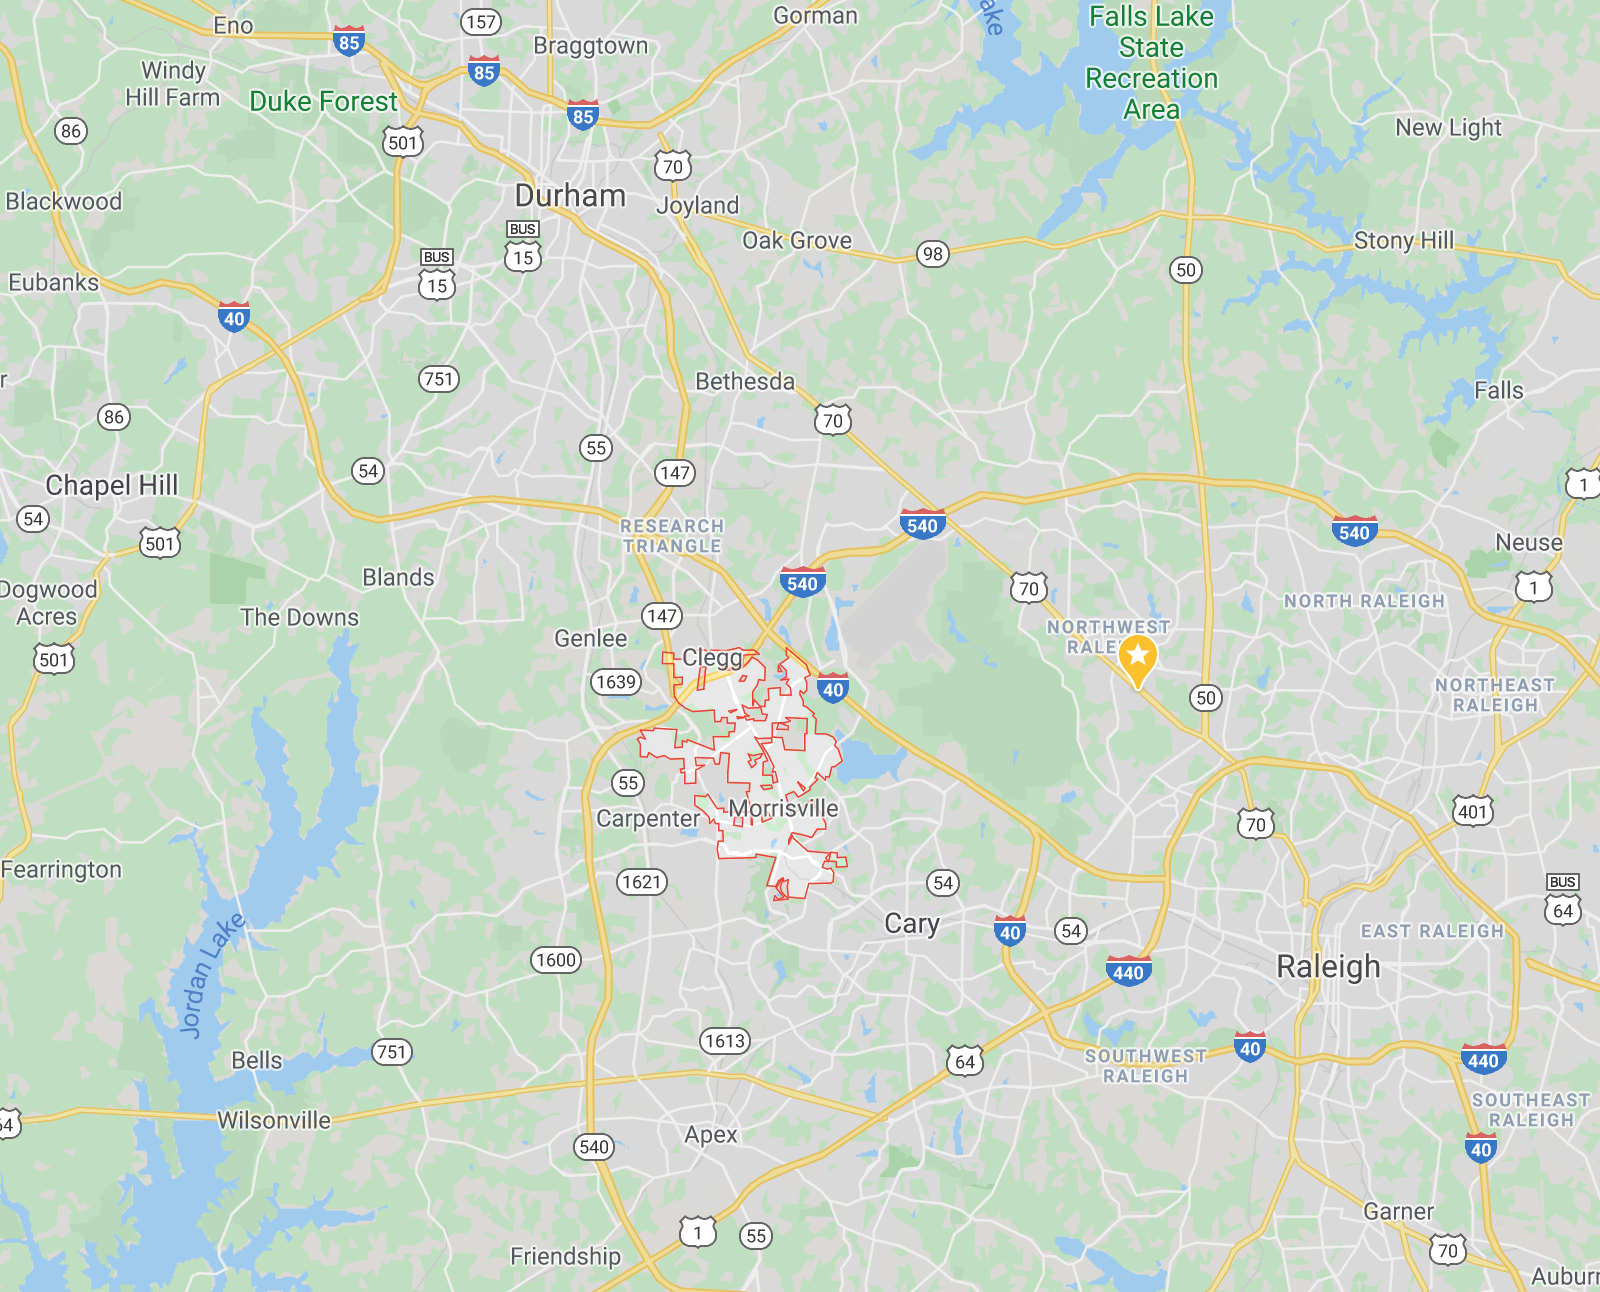 Location of Morrisville, NC. An image of the towns near Morrisville and proximity to Raleigh